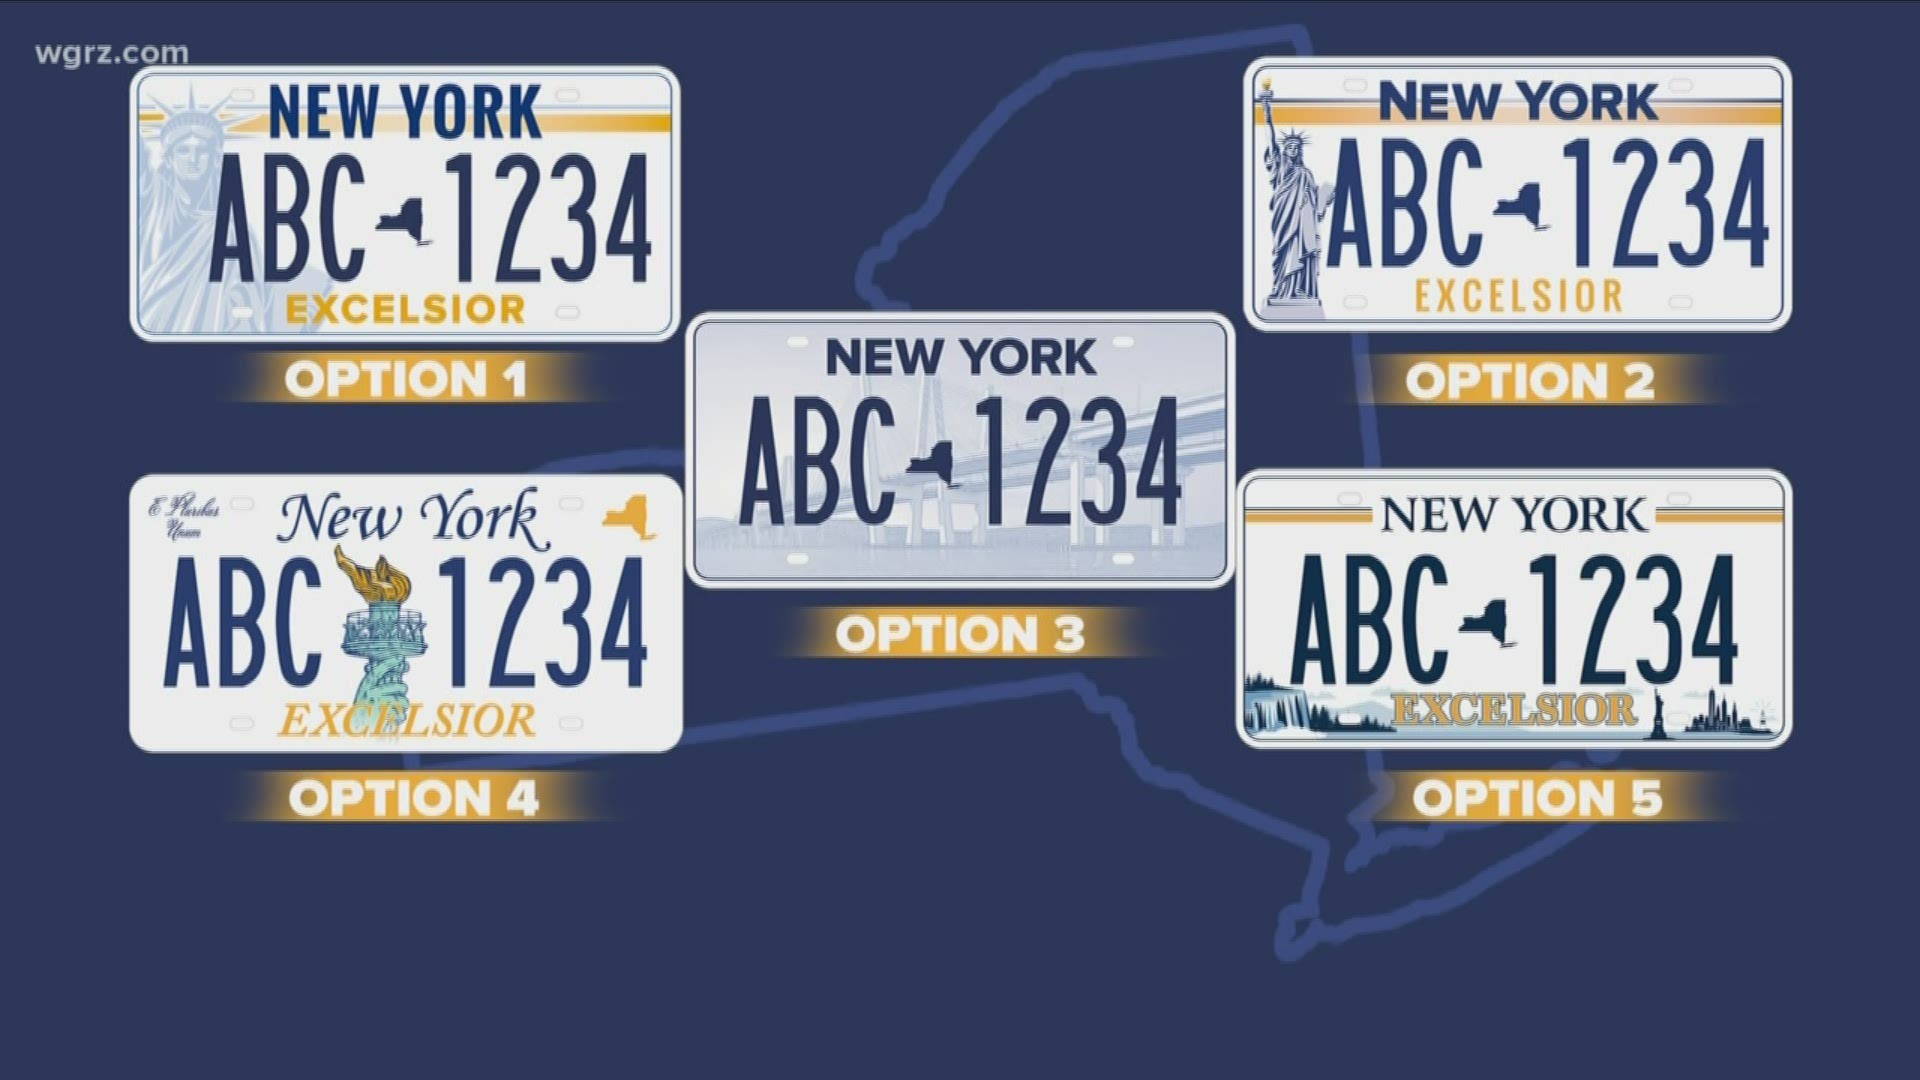 Governor Cuomo's controversial license plate replacement mandate which  continues to draw criticism from some motorists and state lawmakers of both parties.